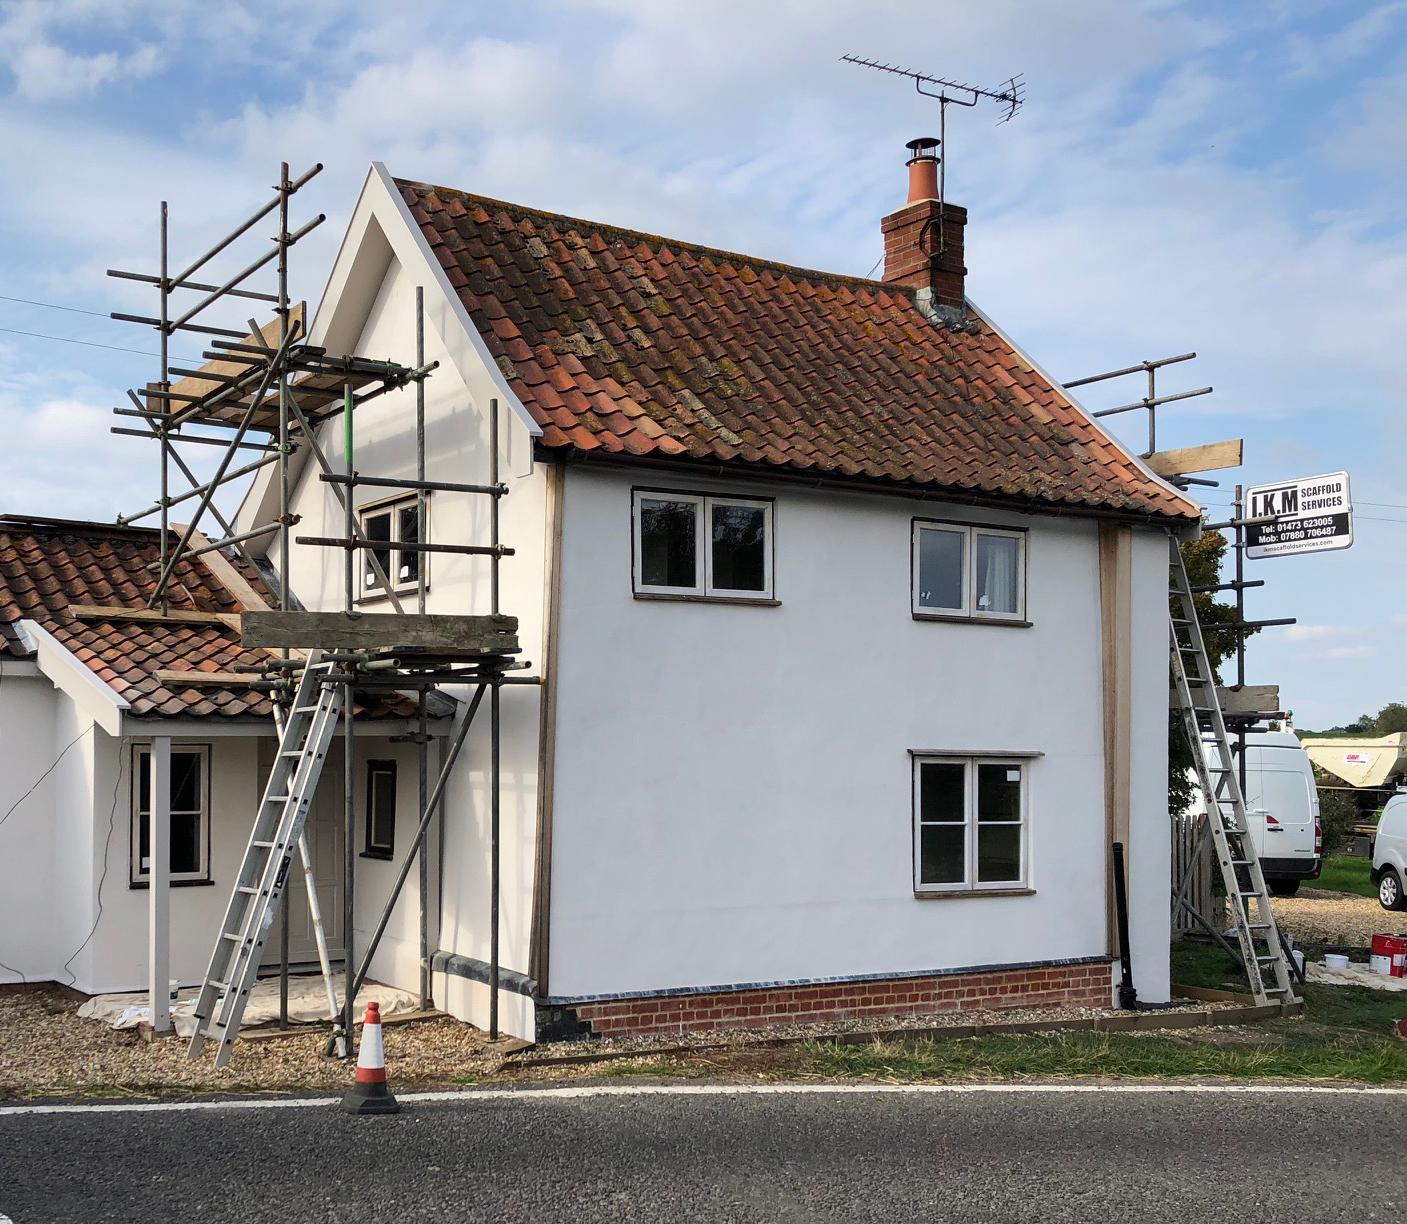 A Suffolk home being renovated by a construction company